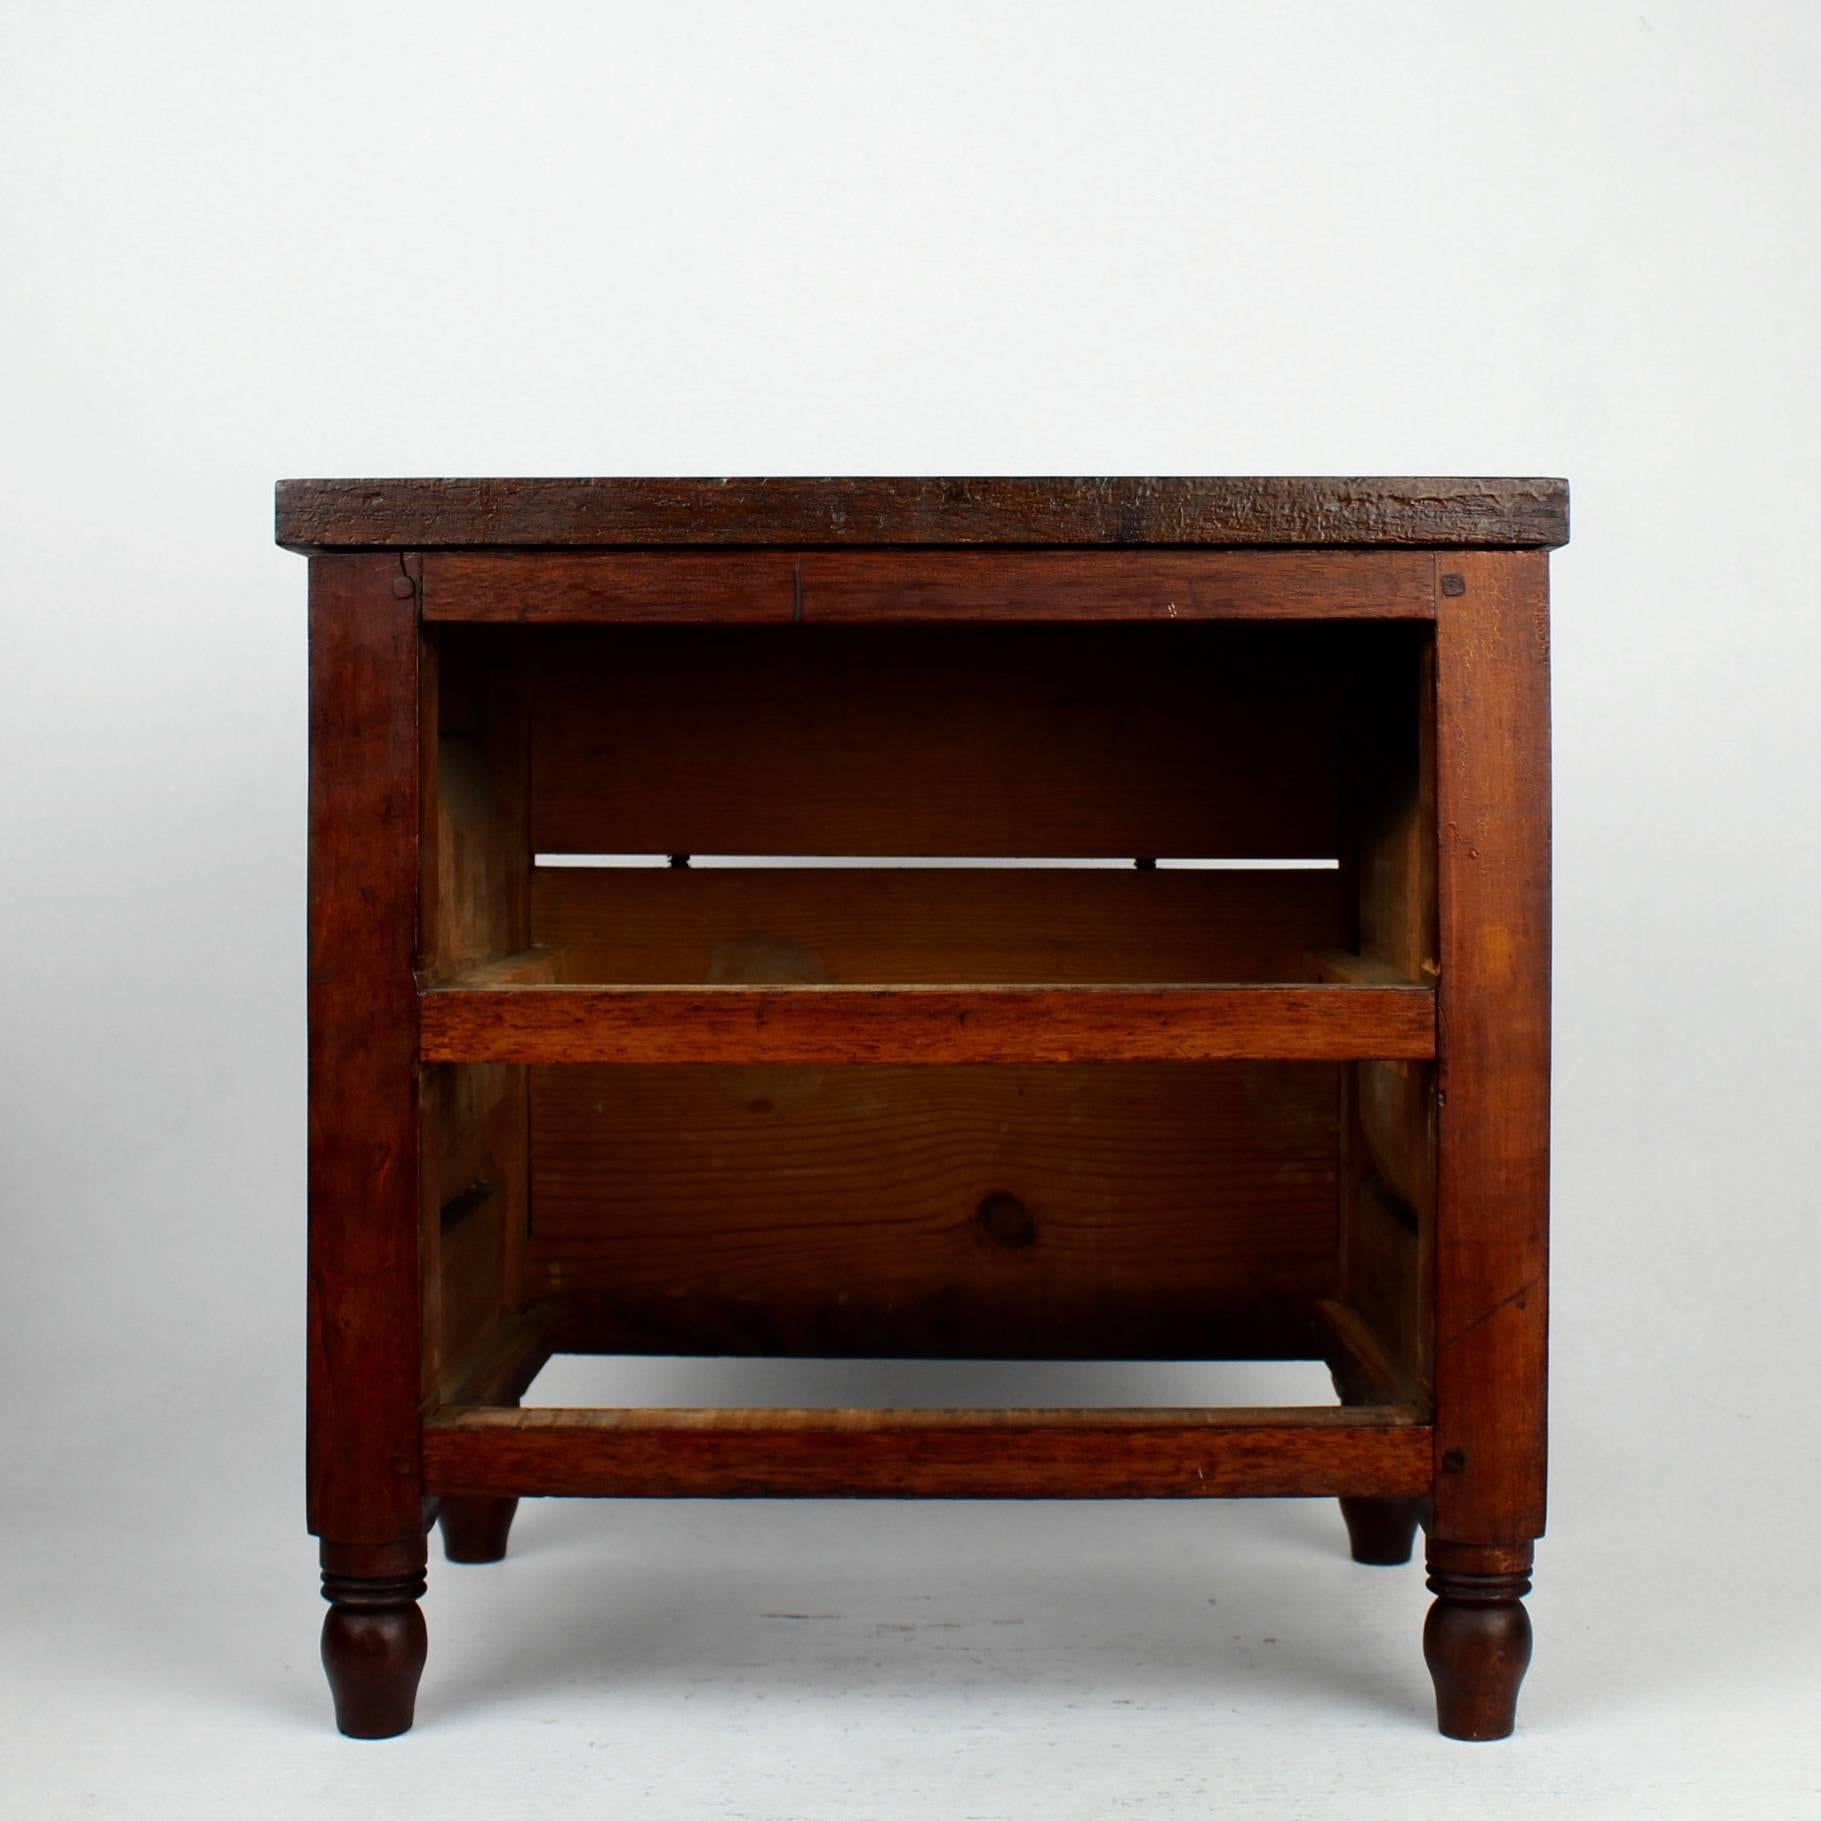 Late 19th Century Pennsylvania Miniature Walnut & Pine Paneled Chest of Drawers For Sale 4